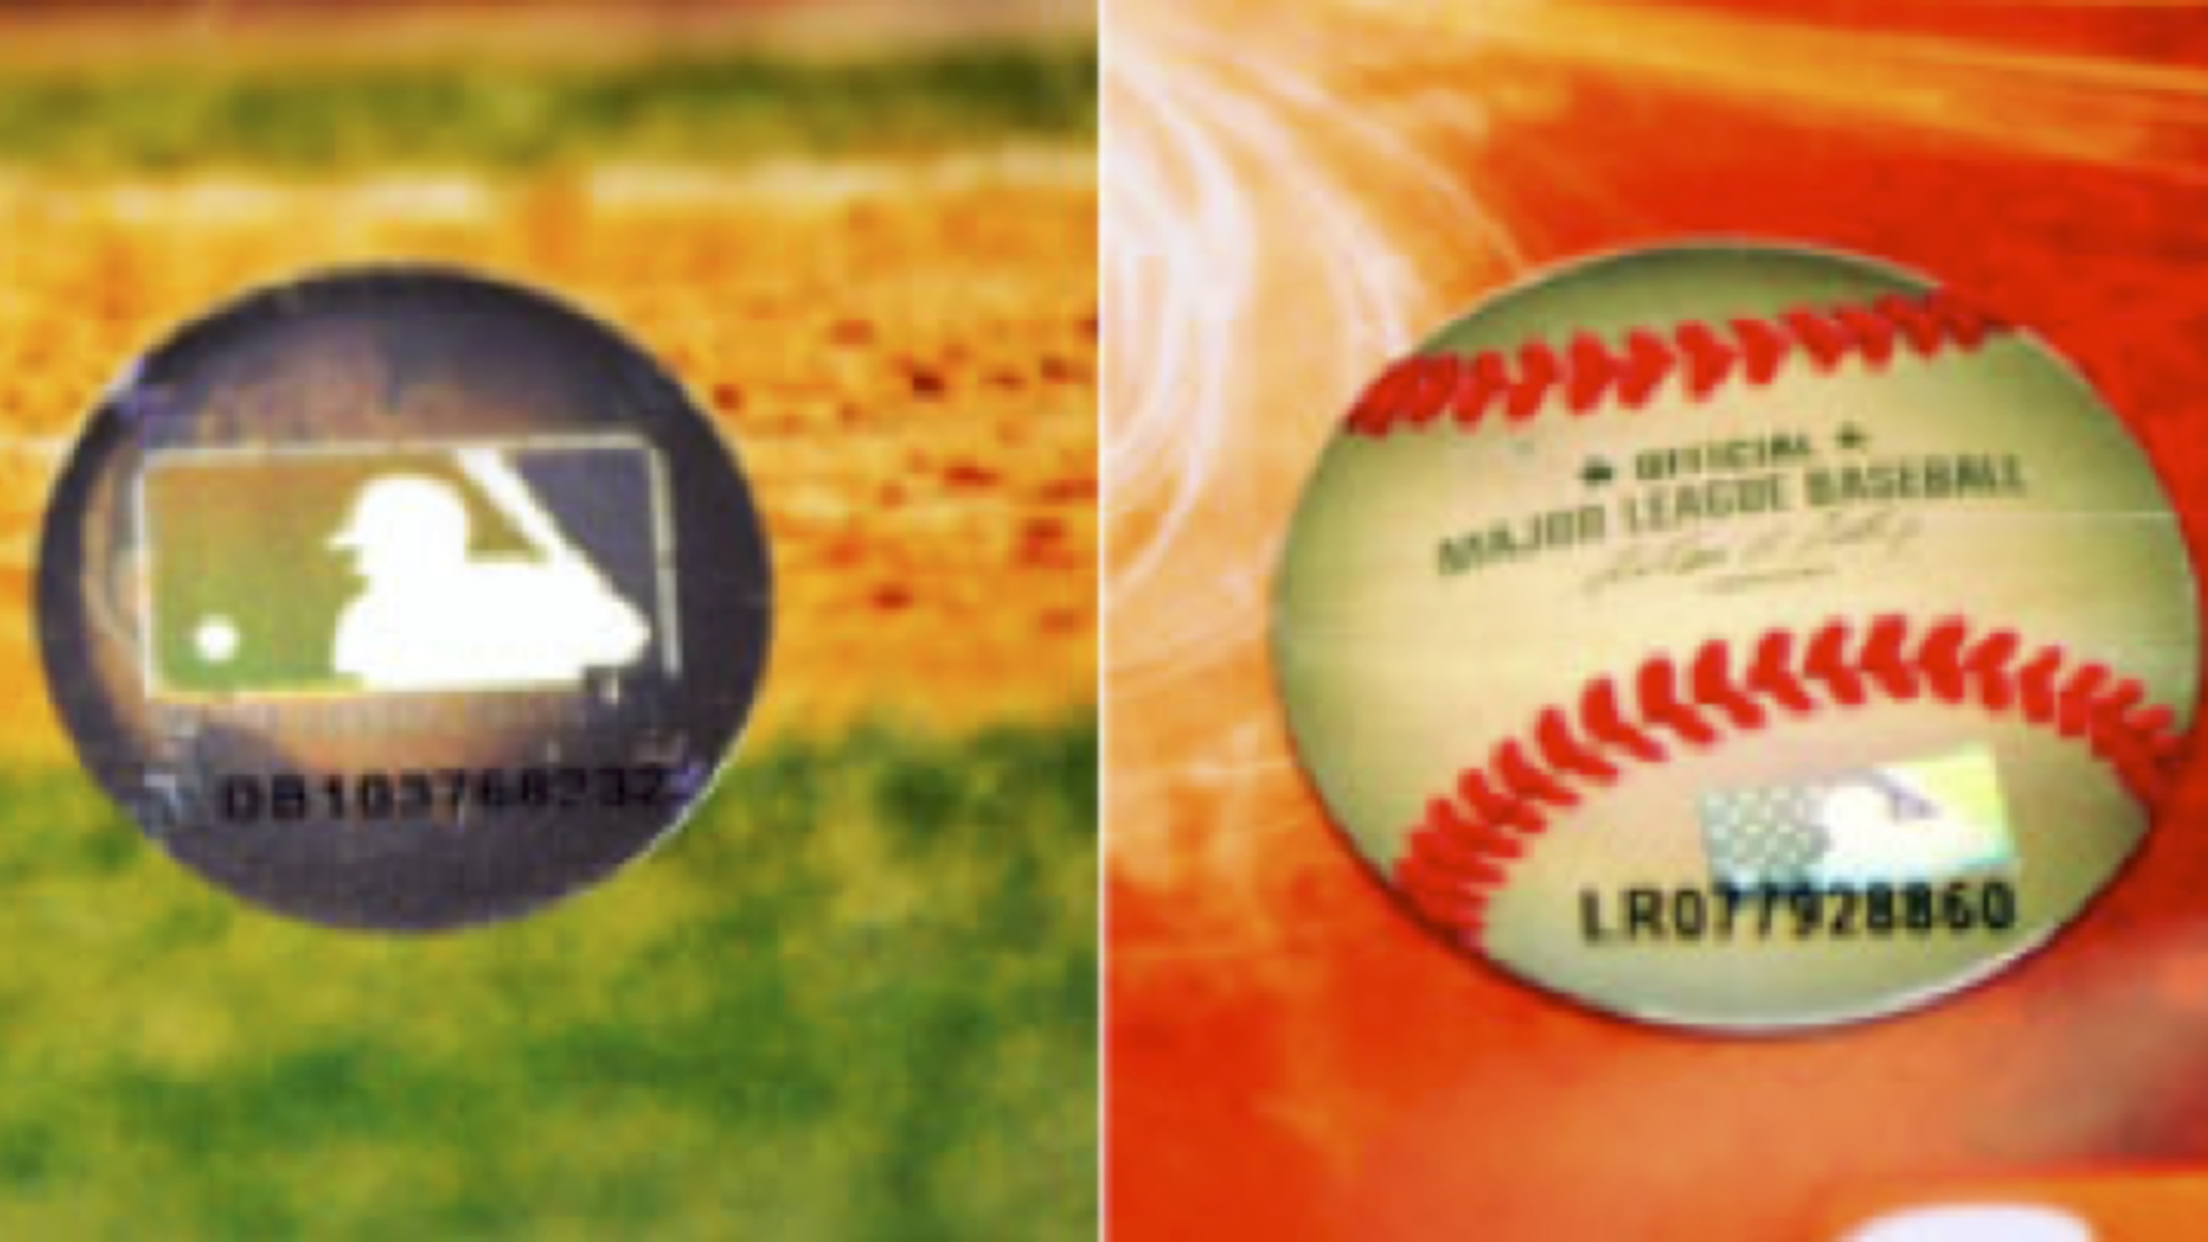 See How Game-Used Memorabilia Gets Authenticated 